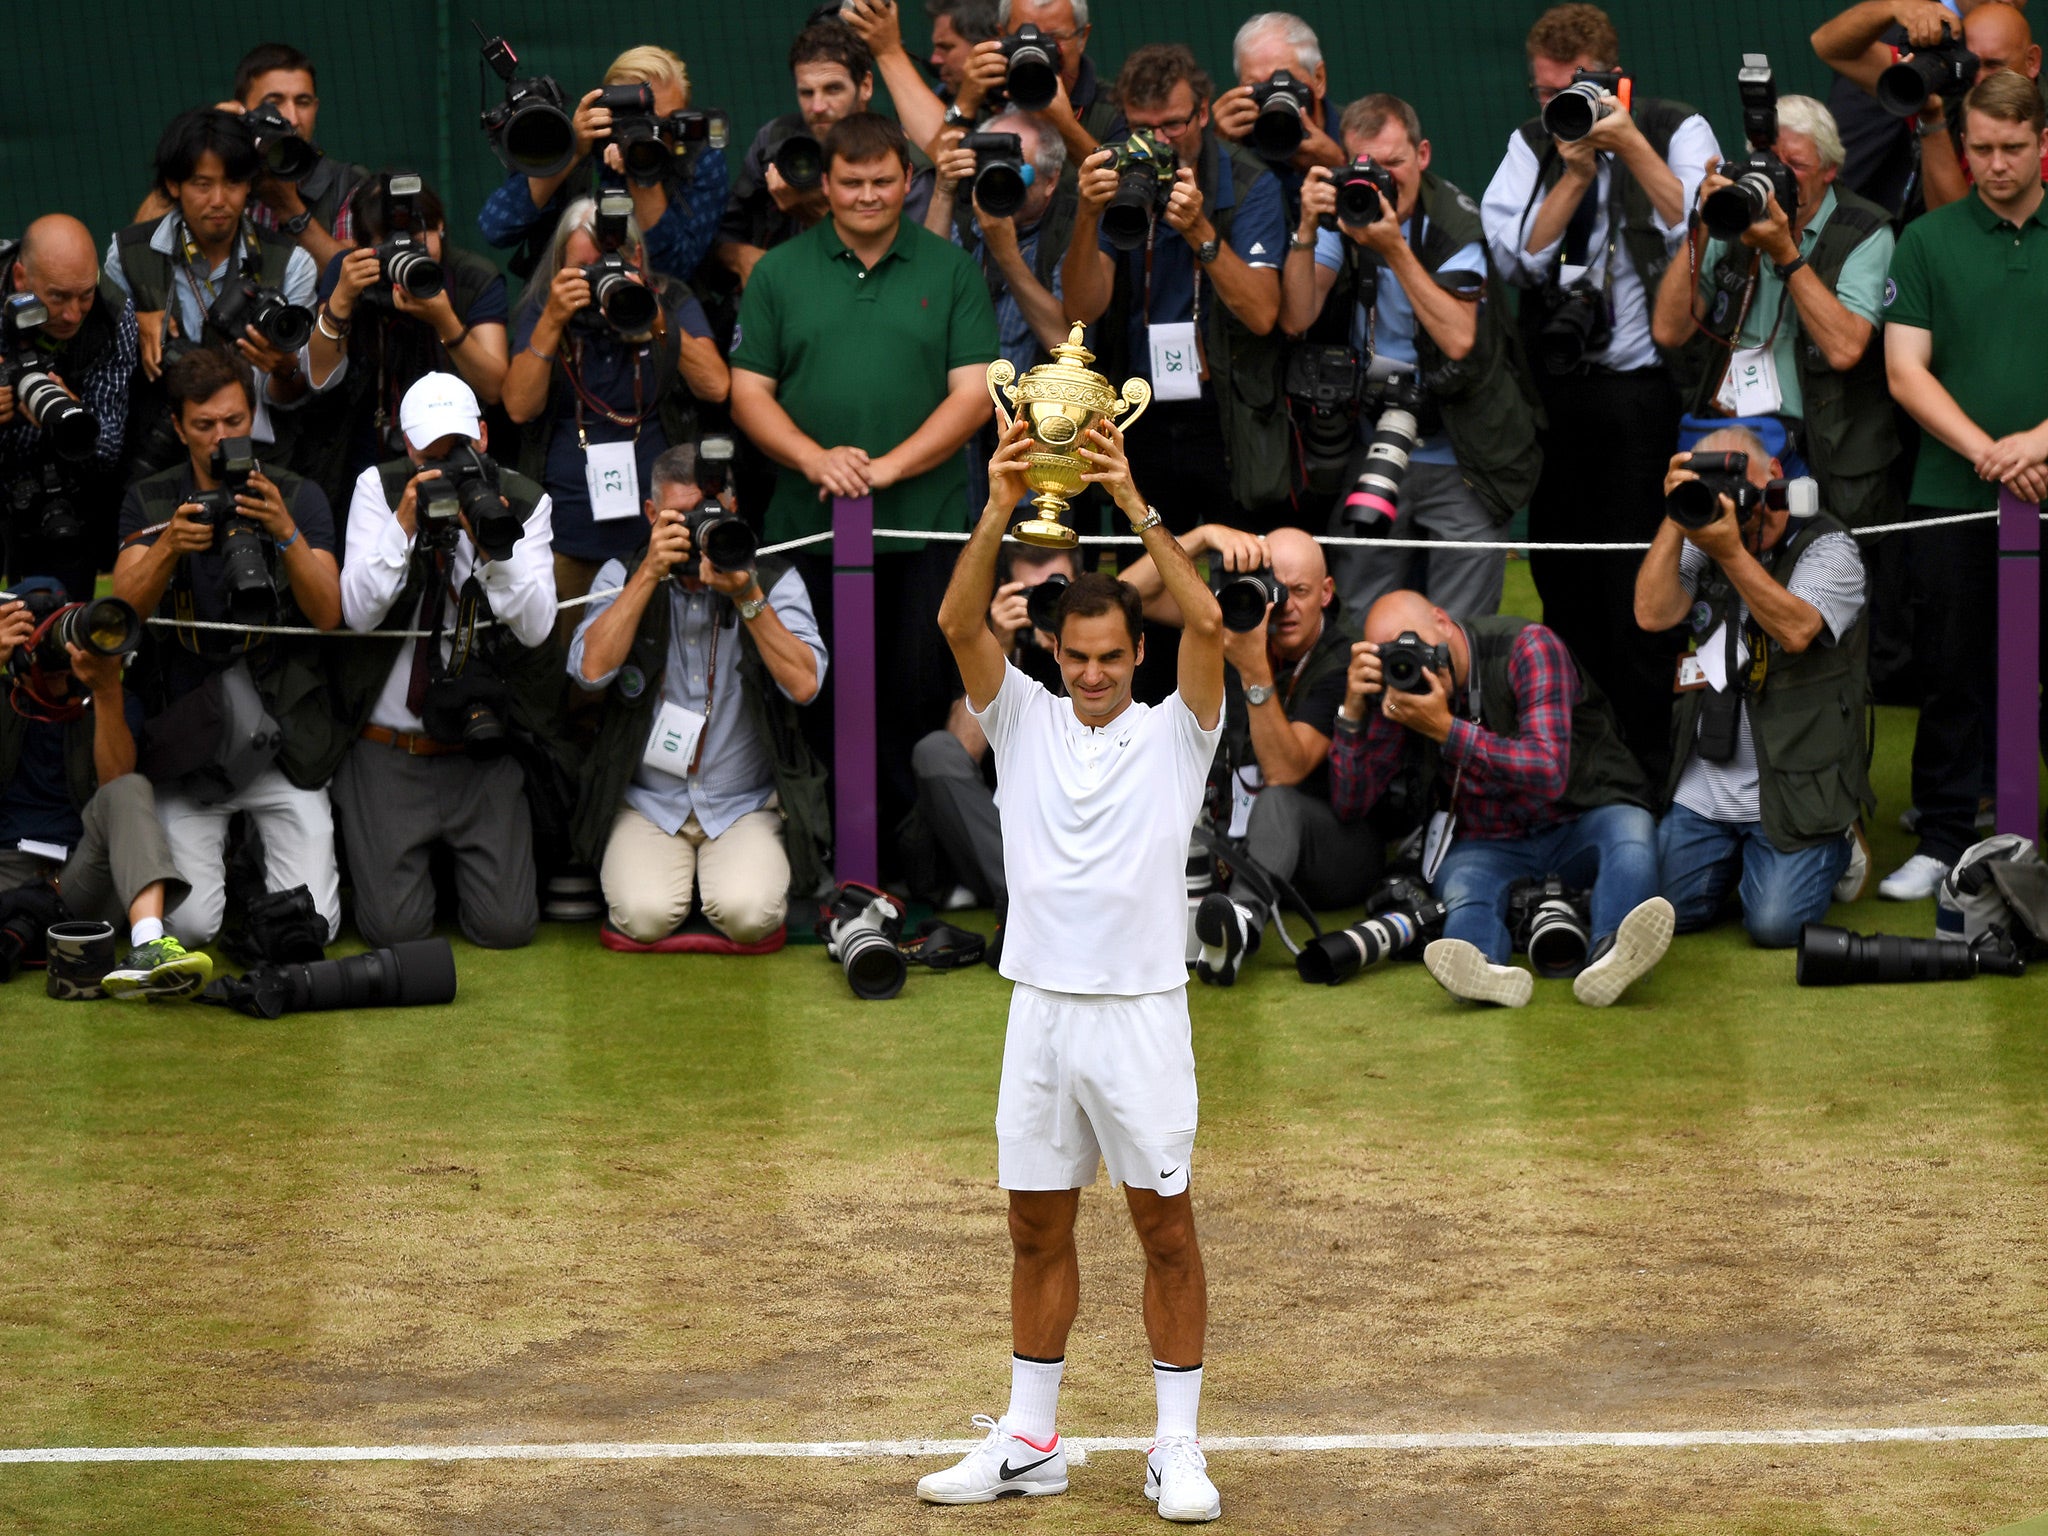 Roger Federer lifts the Wimbledon trophy after beating Marin Cilic